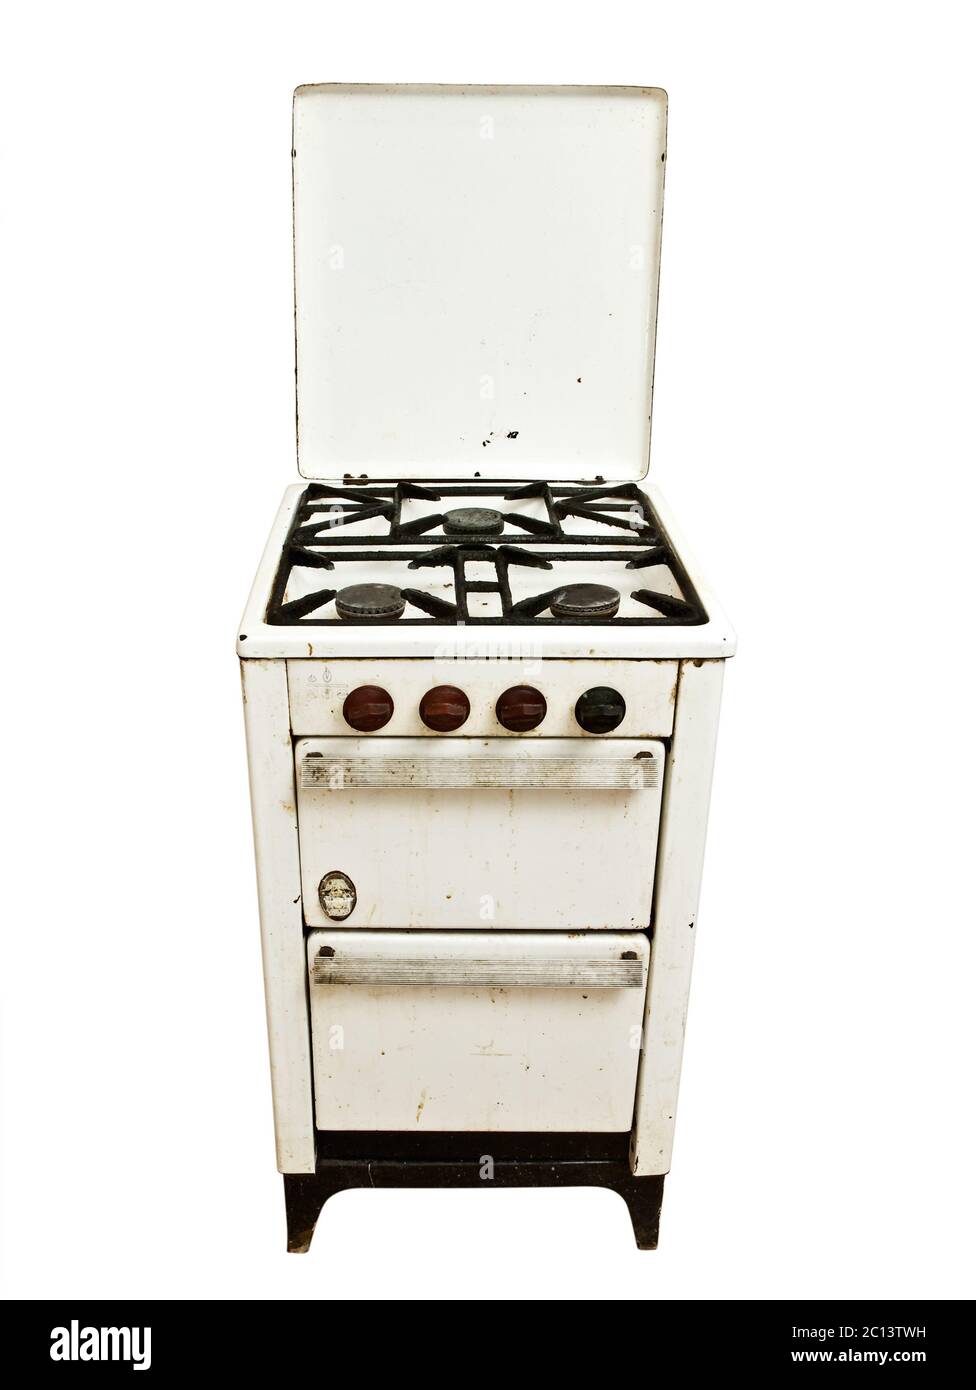 Old stove Cut Out Stock Images & Pictures - Alamy